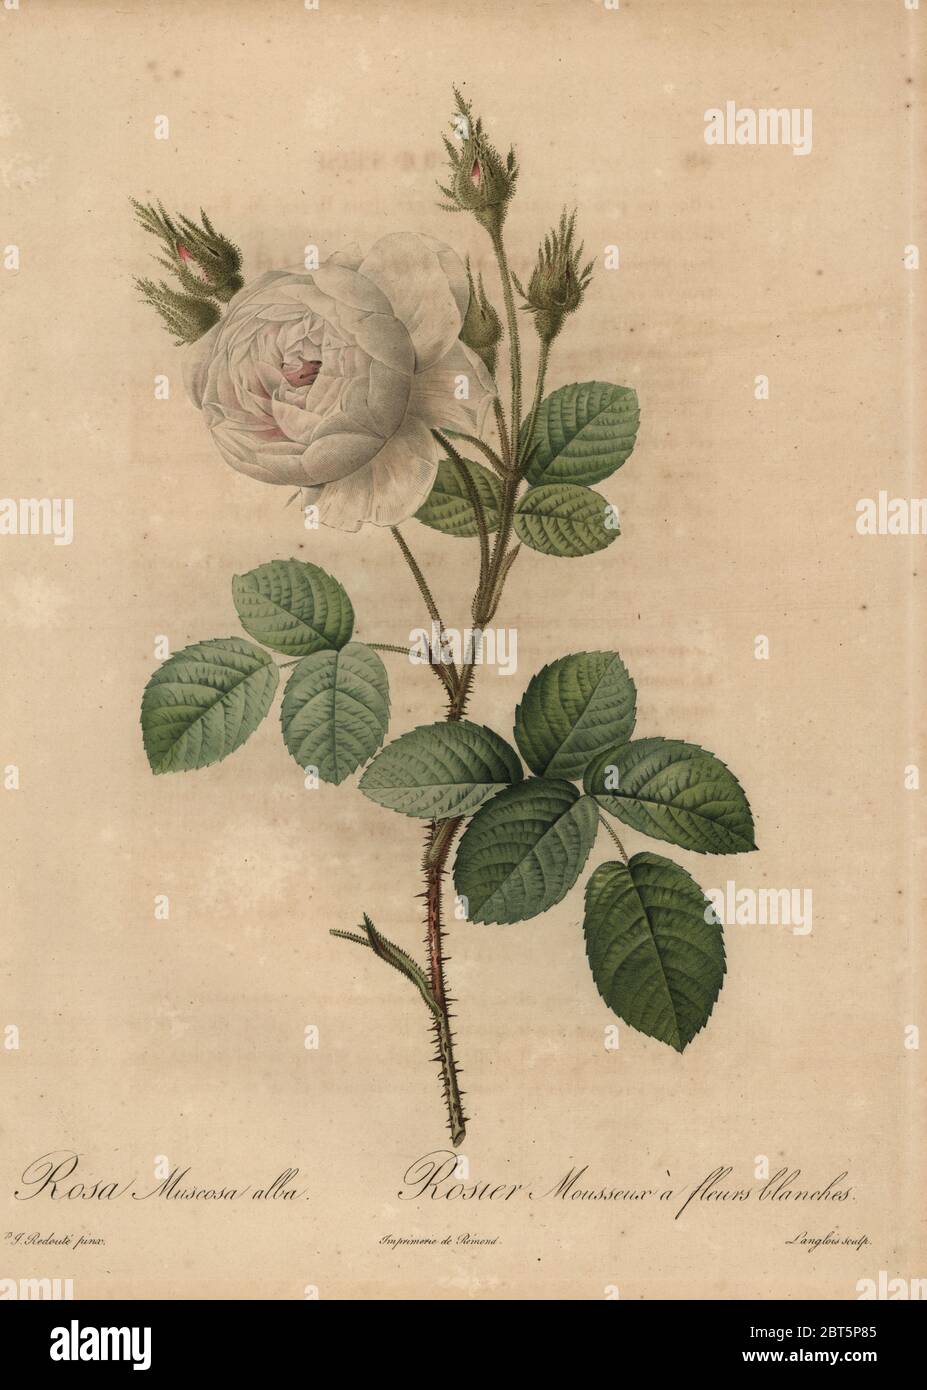 White cabbage rose, Rosa muscosa alba, Rosier mousseux a fleurs blanches. Rosa centifolia f. muscosa. Stipple copperplate engraving by Pierre Gabriel Langlois handcoloured a la poupee after a botanical illustration by Pierre-Joseph Redoute from the first folio edition of Les Roses, Firmin Didot, Paris, 1817. Stock Photo